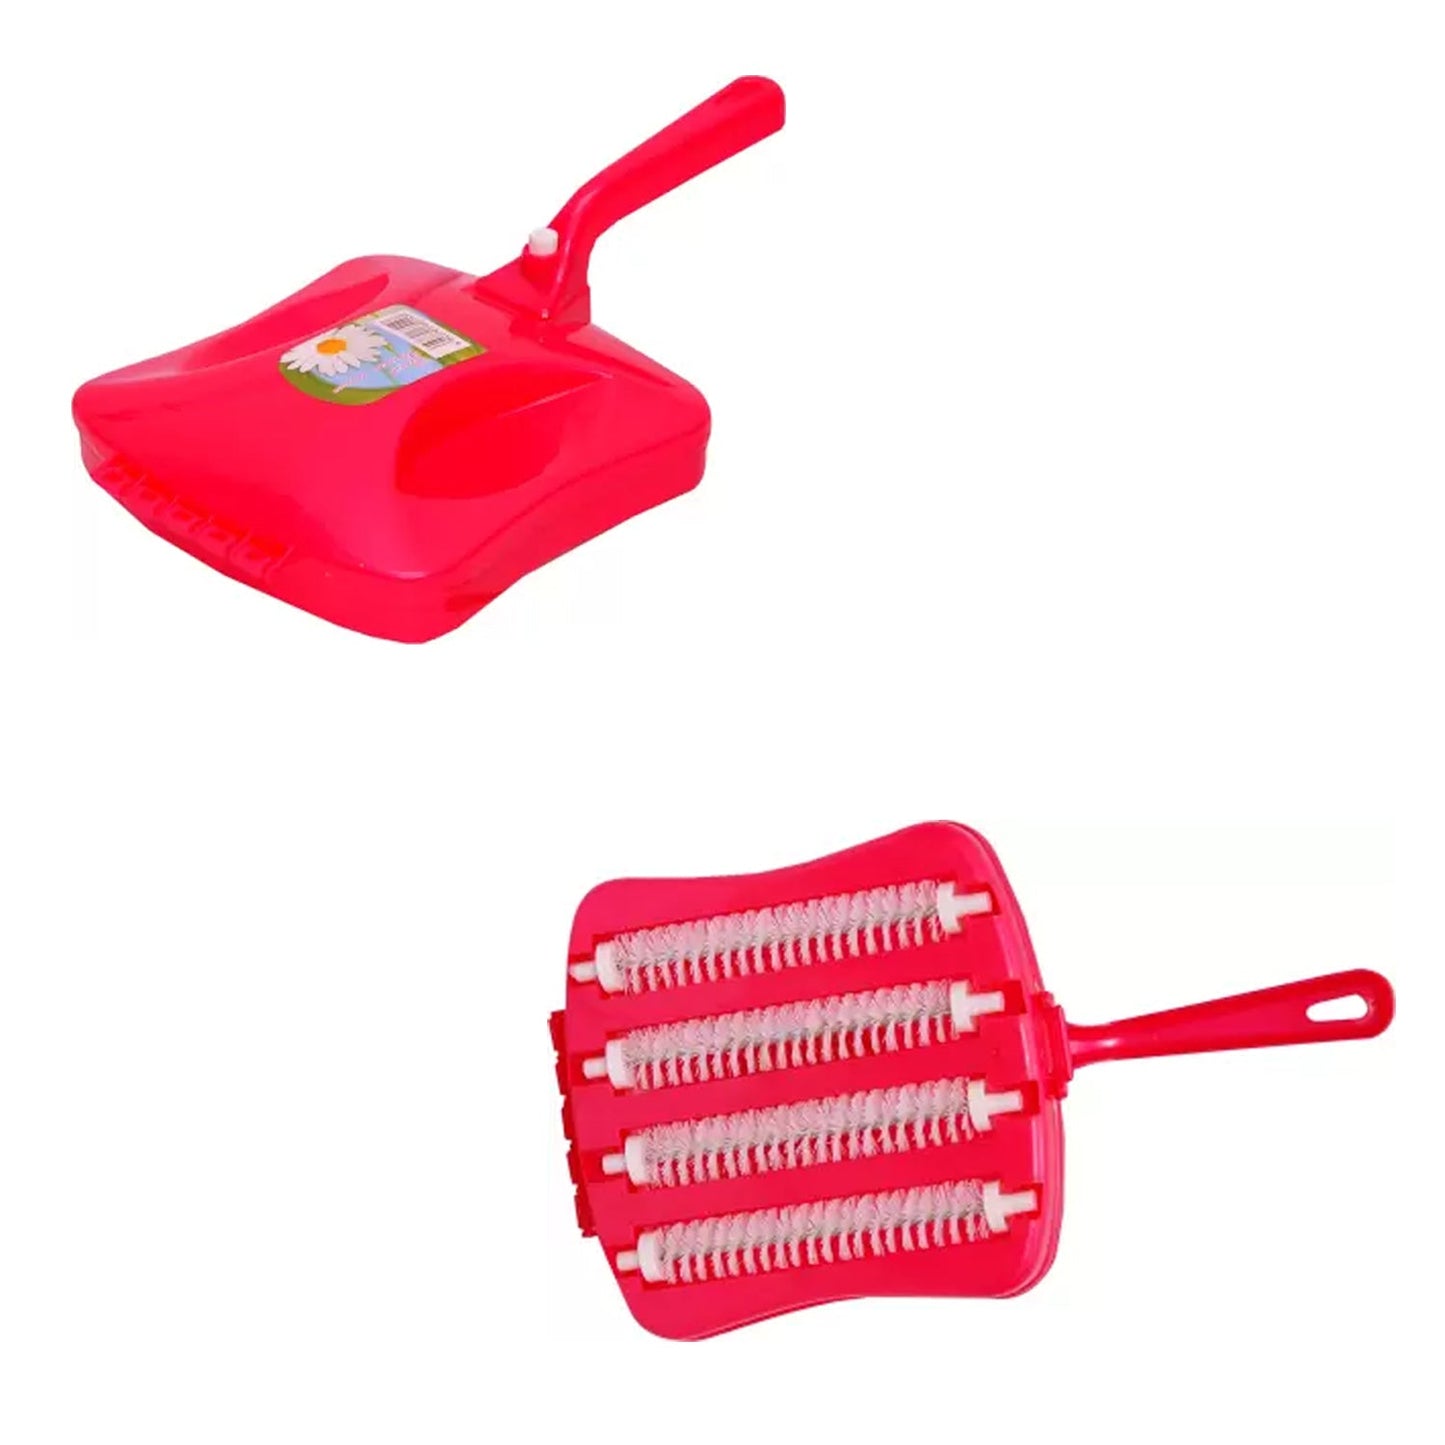 6230 Plastic Handheld Carpet Roller Brush Cleaning with Dust Crumb Collector, Wet, and Dry Brush DeoDap